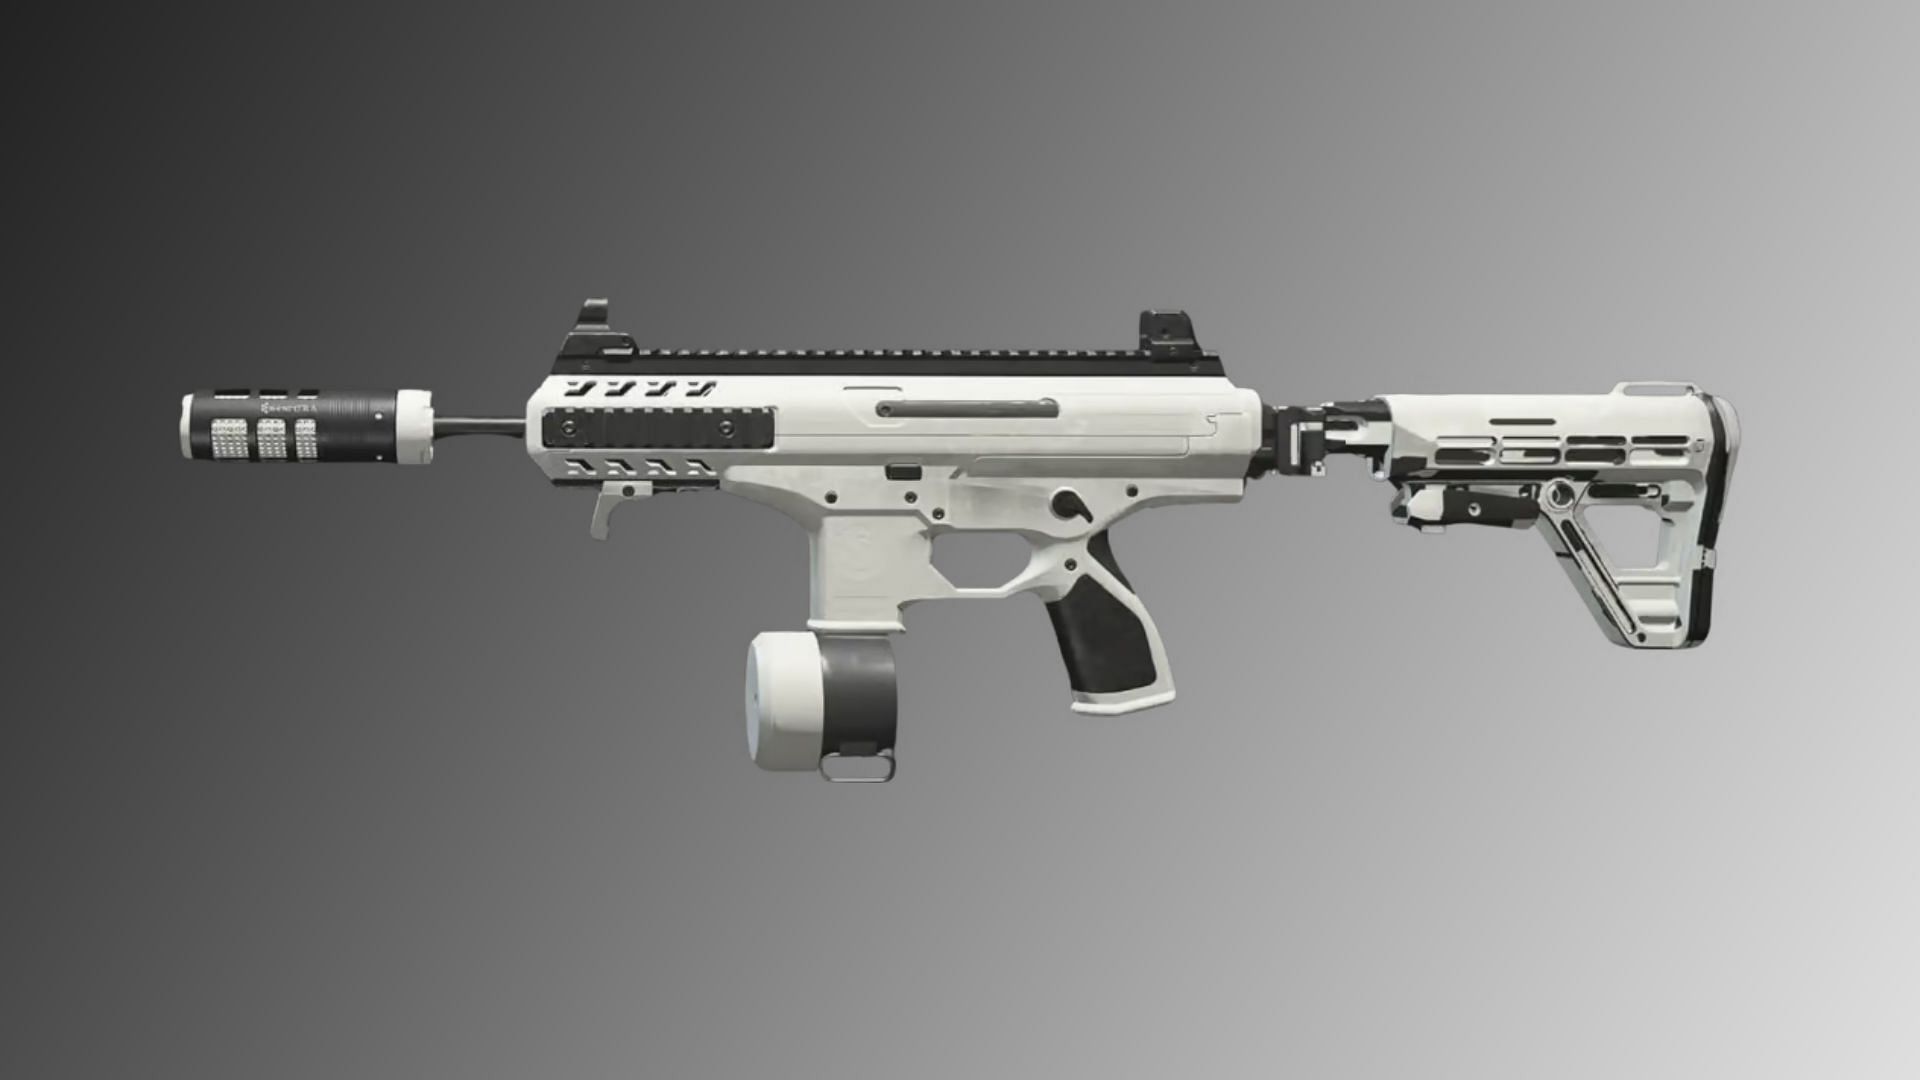 HRM-9 SMG in MW3 (Image via Activision)